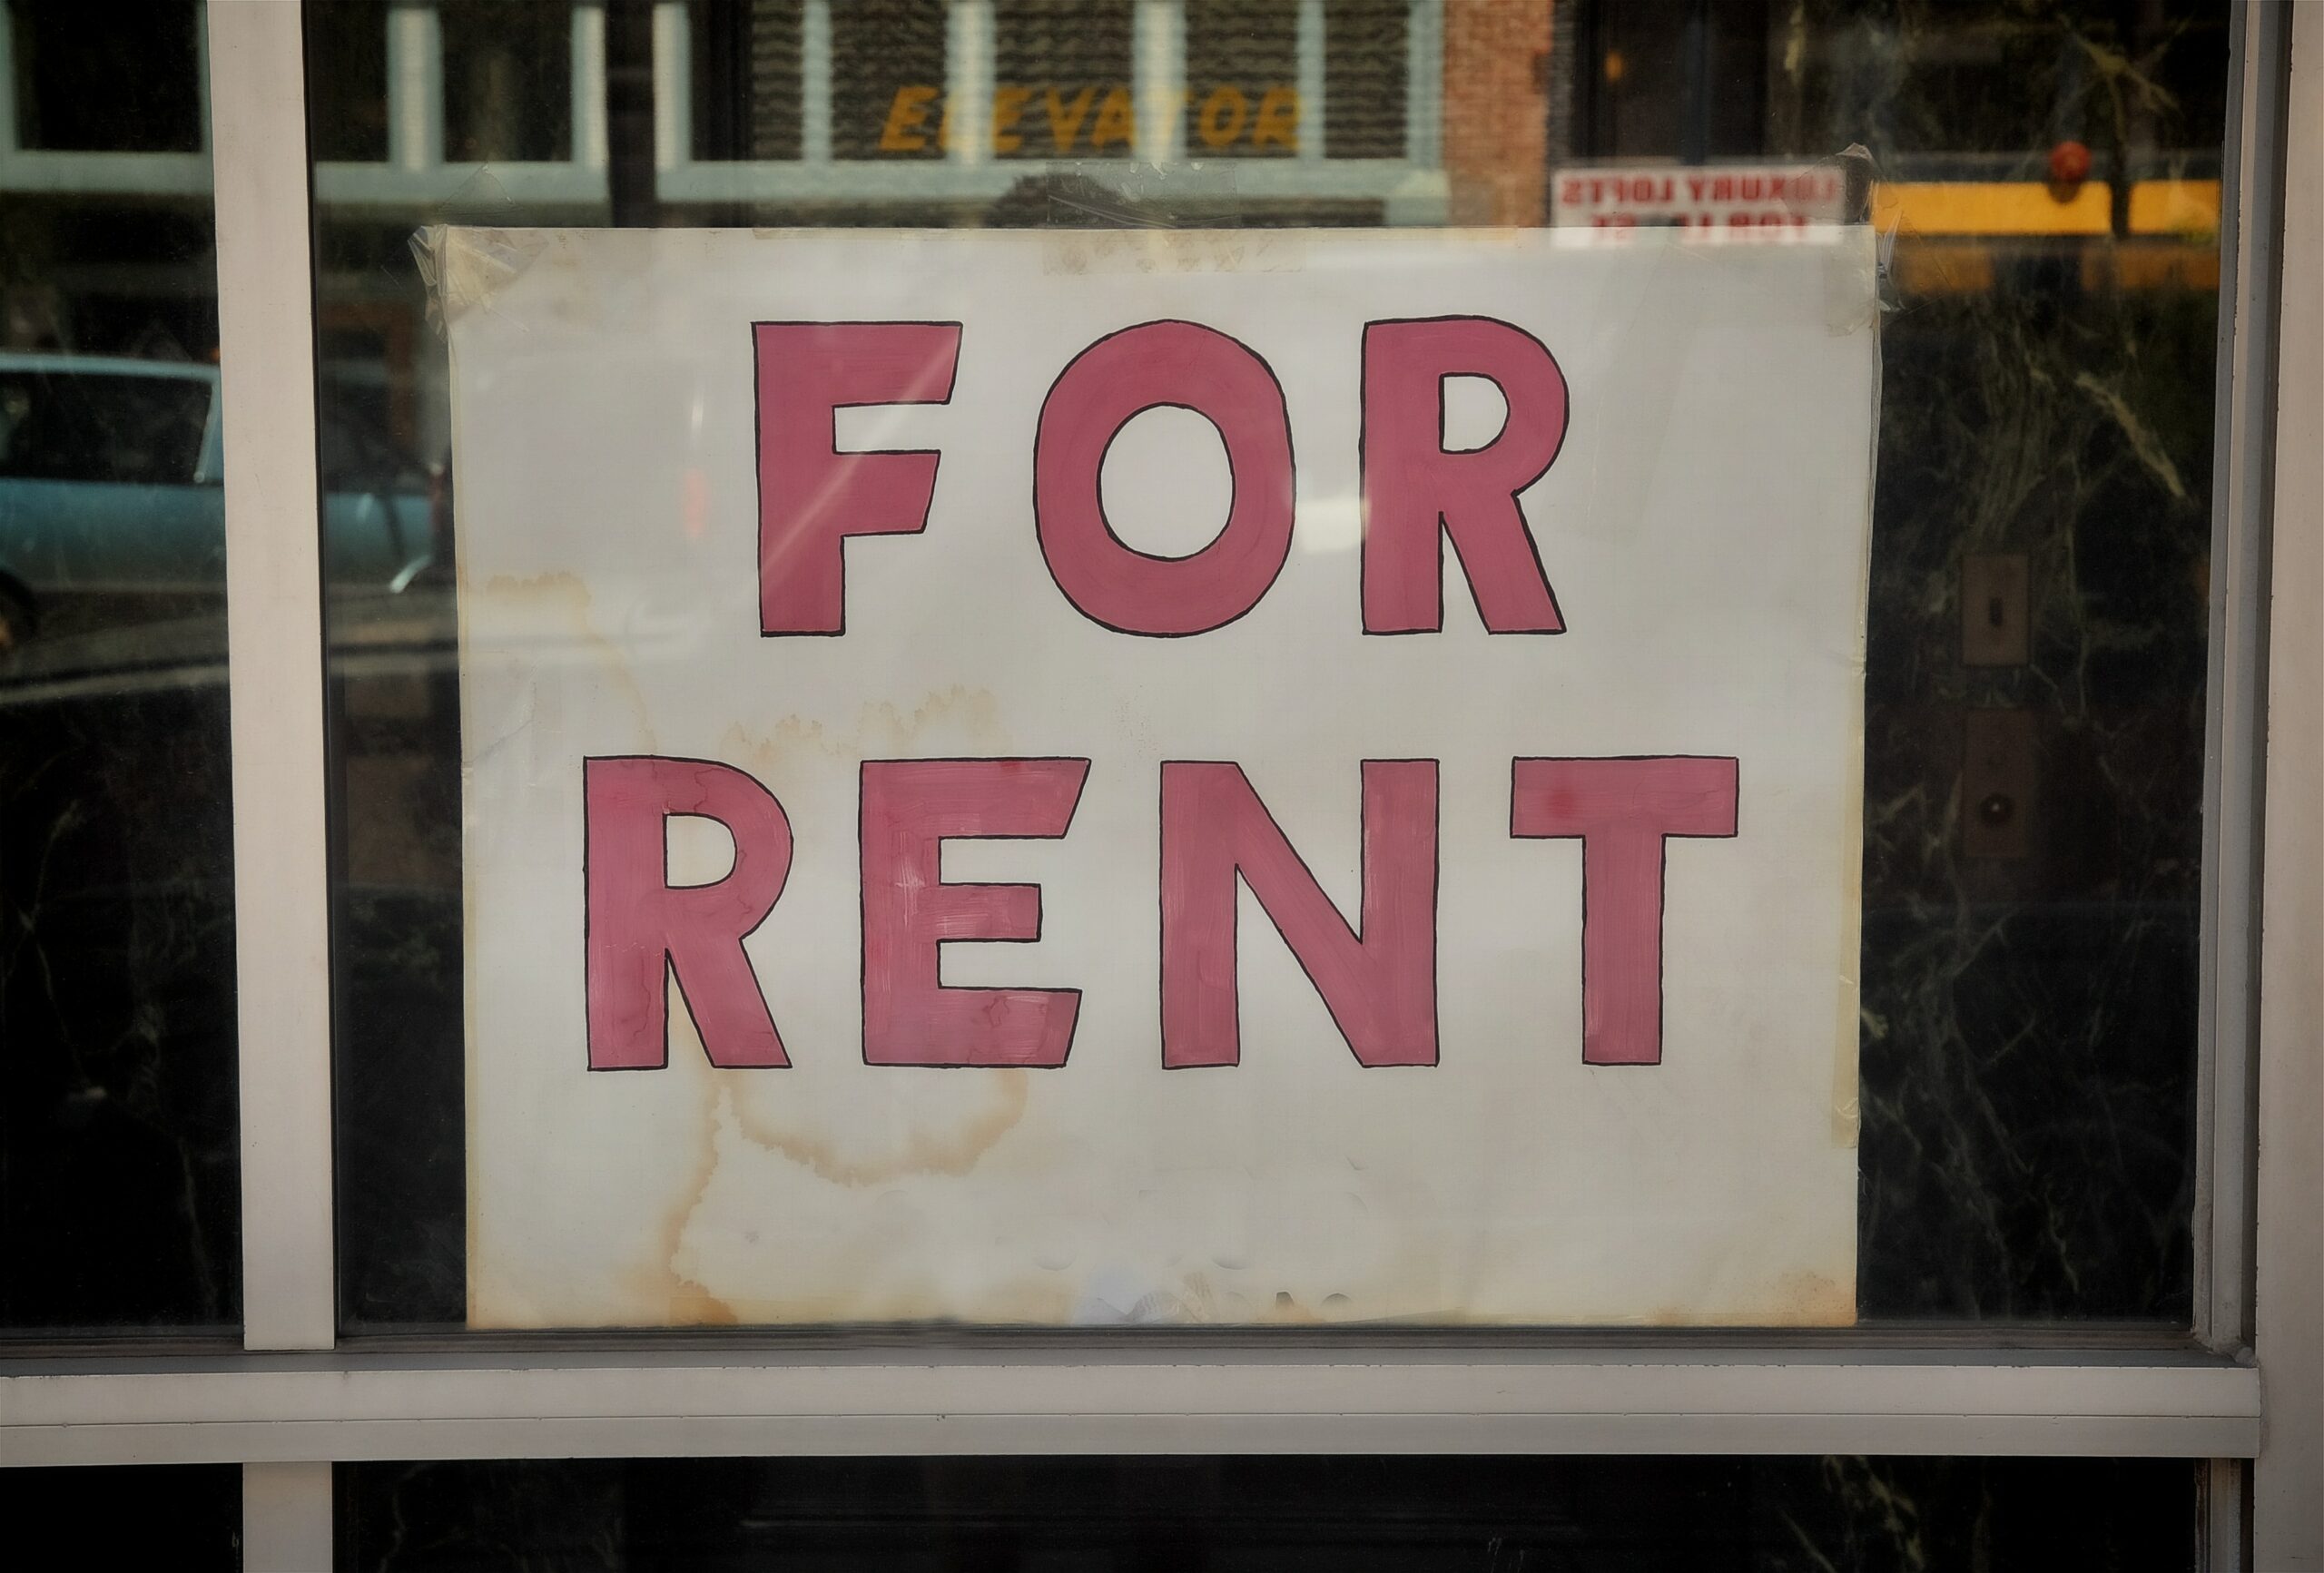 For rent sign on display in a window